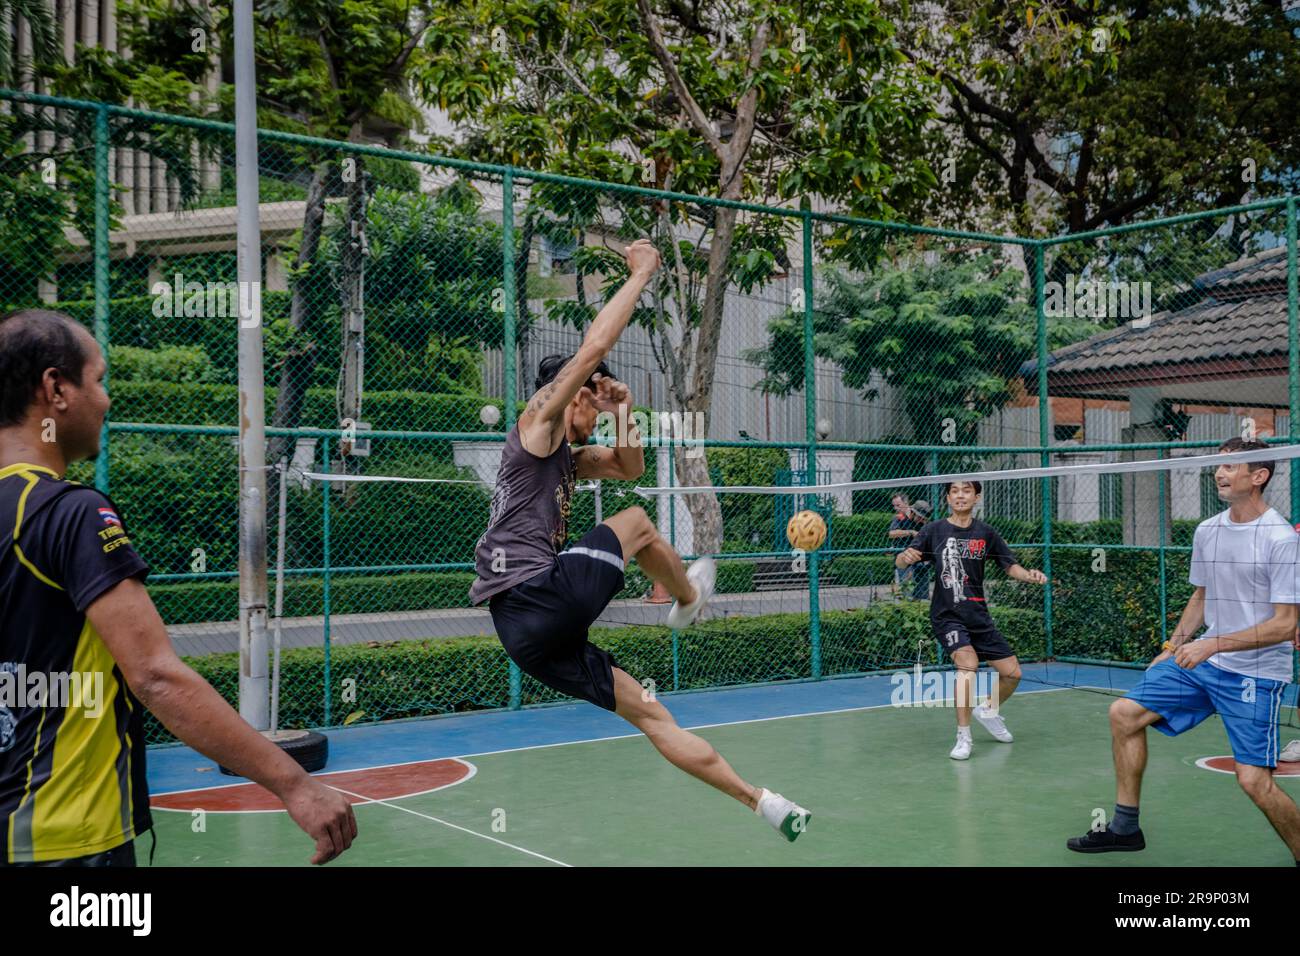 Local residents are seen playing Sepak Takraw at Benchasiri Public Park on Sukhumvit Road. Sepak Takraw also called kick volleyball or Thailand’s Acrobatic Volleyball is one of Southeast Asia’s most popular sports which is played with a ball made of rattan or synthetic plastic where the players are only allowed to touch the ball with their feet, body, or head. Stock Photo